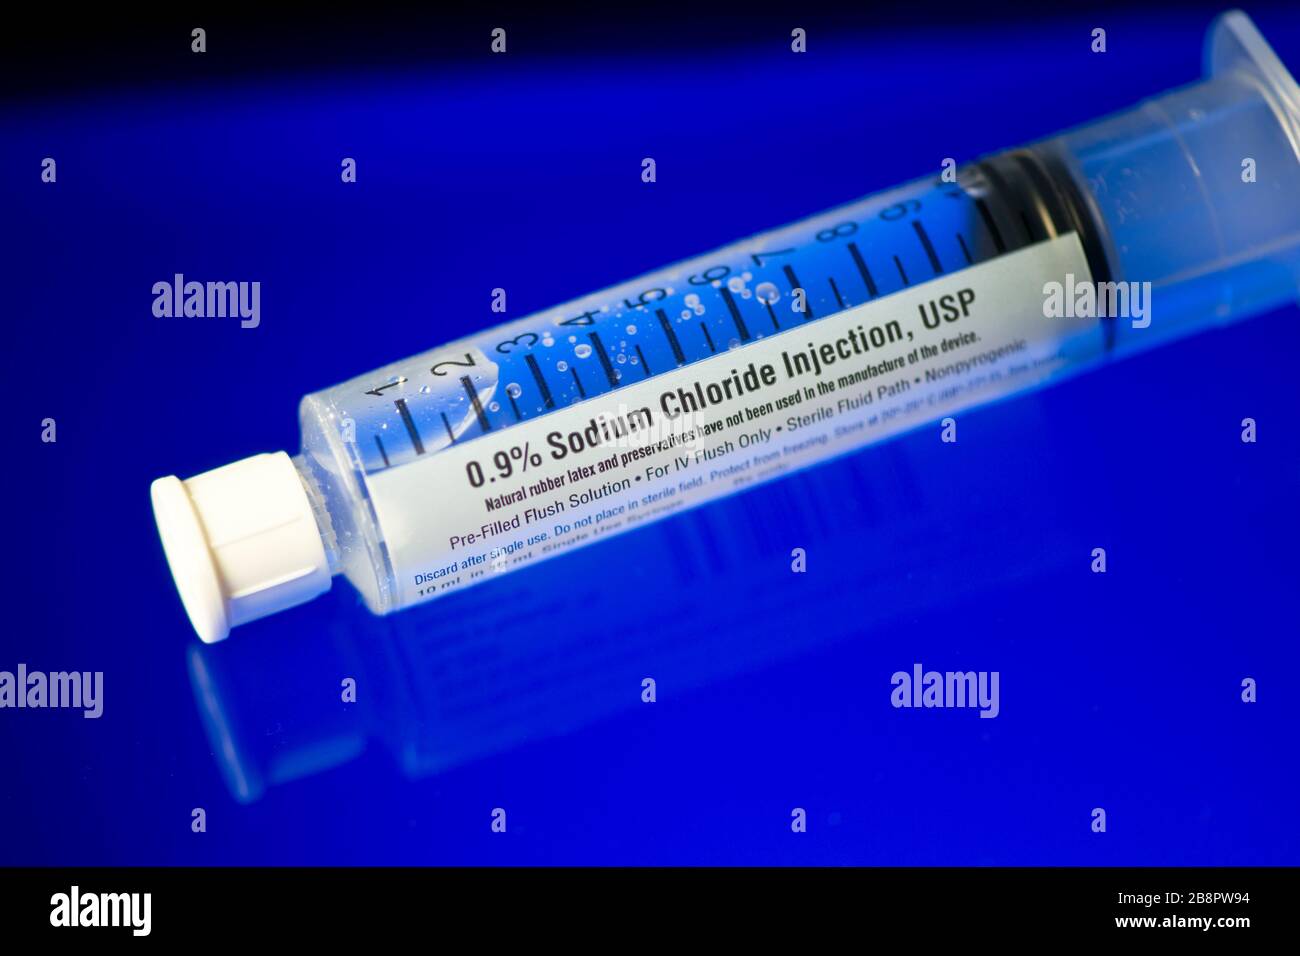 Close up of pre-filled sterile saline injection vial on blue reflective surface. Stock Photo